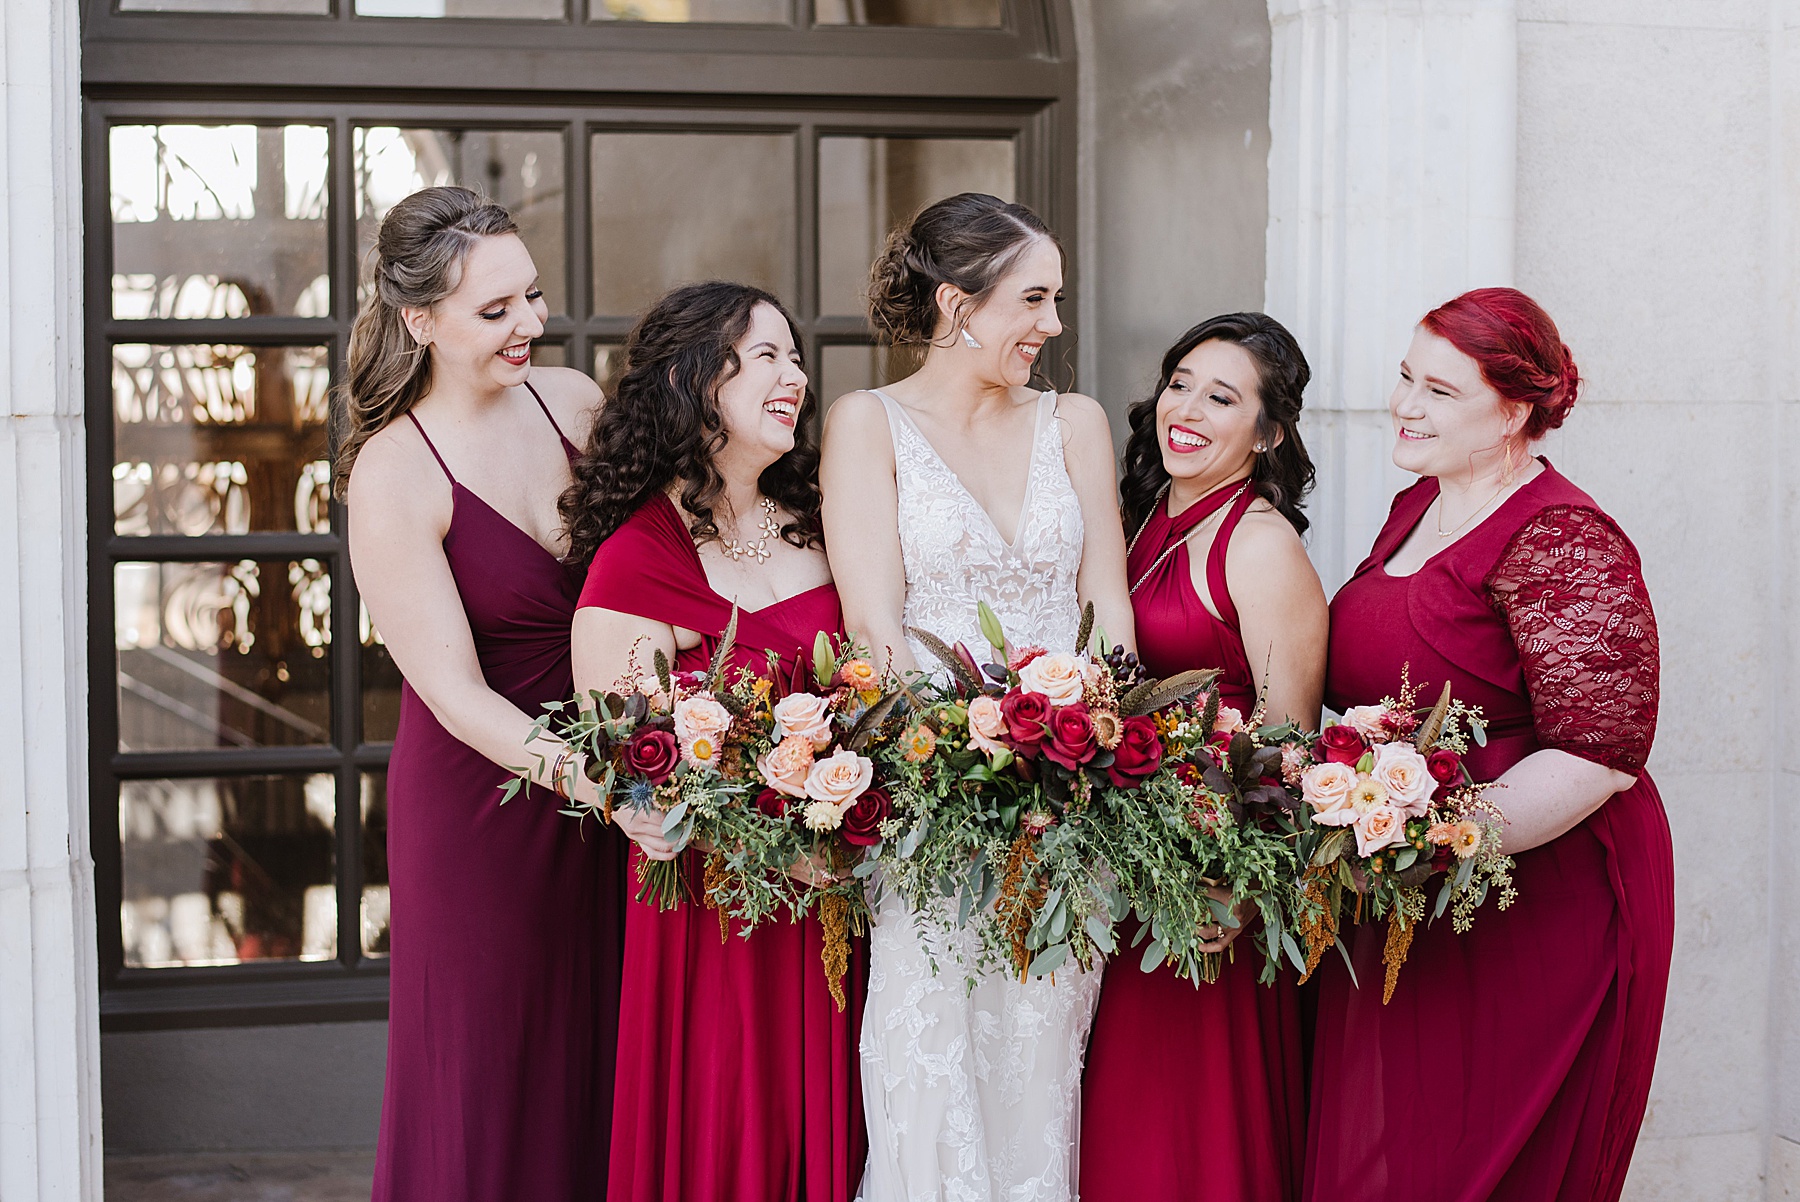 Tooth and Nail Winery Fall Wedding | Mr. & Mrs. San Luis